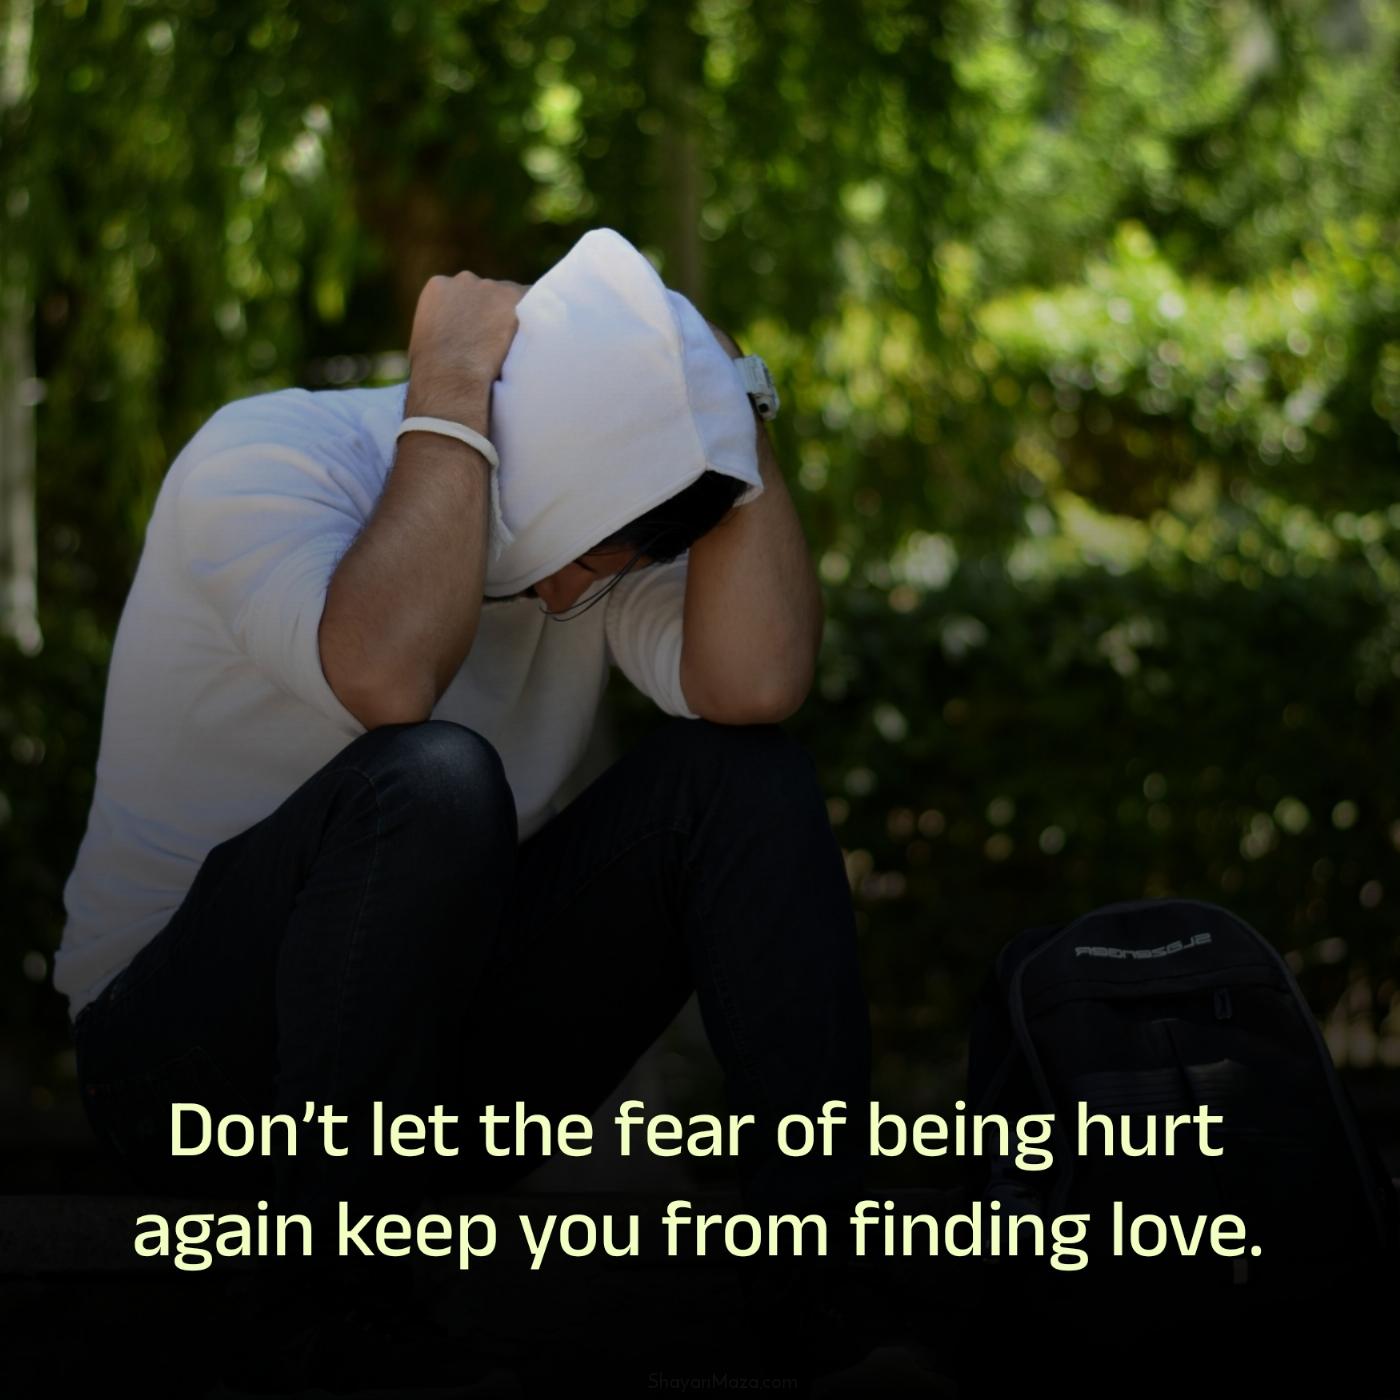 Dont let the fear of being hurt again keep you